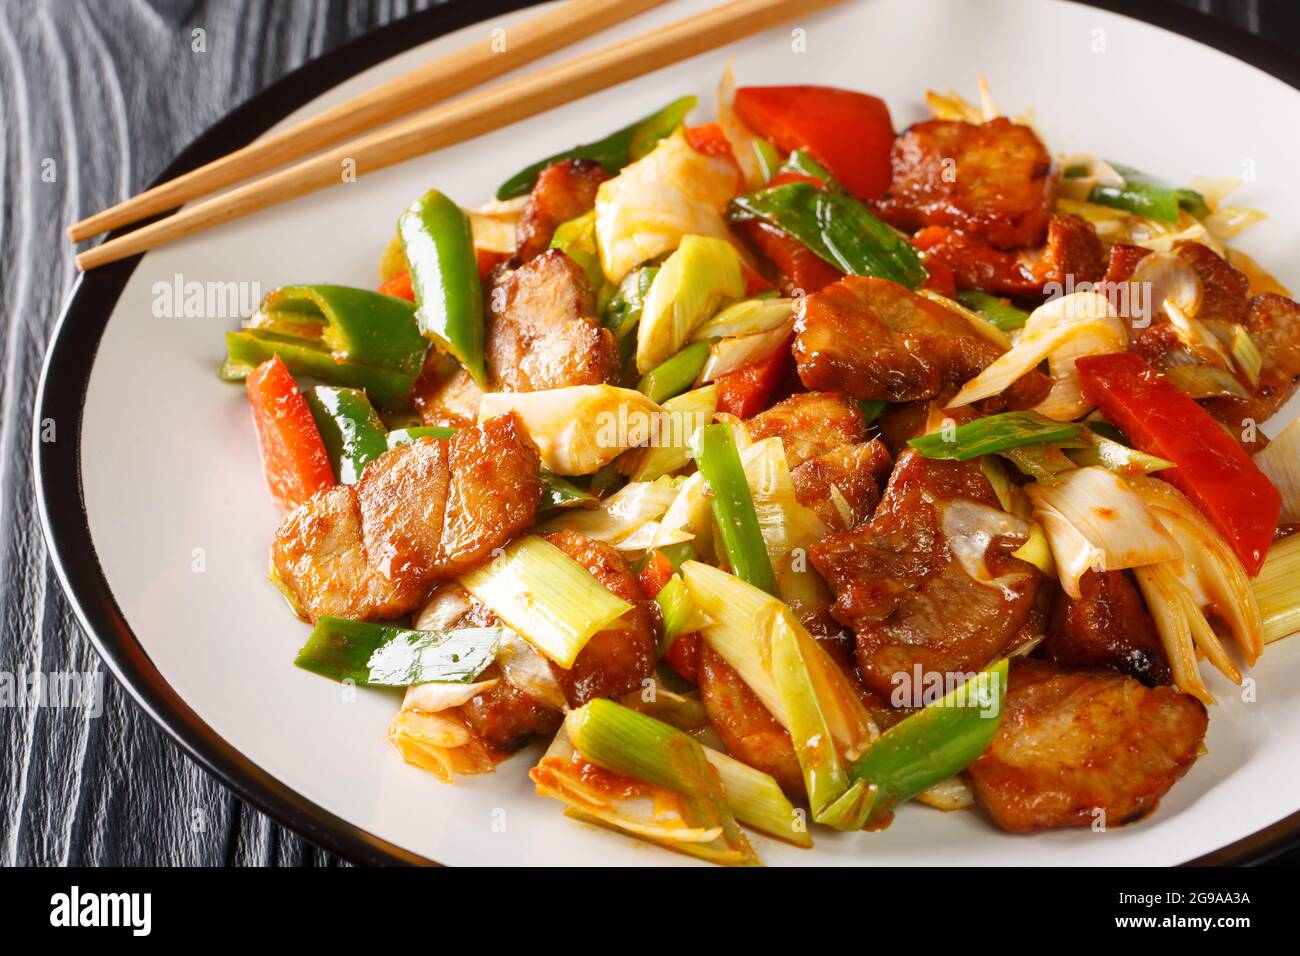 Twice Cooked Pork Hui Guo Rou Szechuan Pork Stir Fry Closeup In The Plate On The Wooden Table Horizontal Stock Photo Alamy